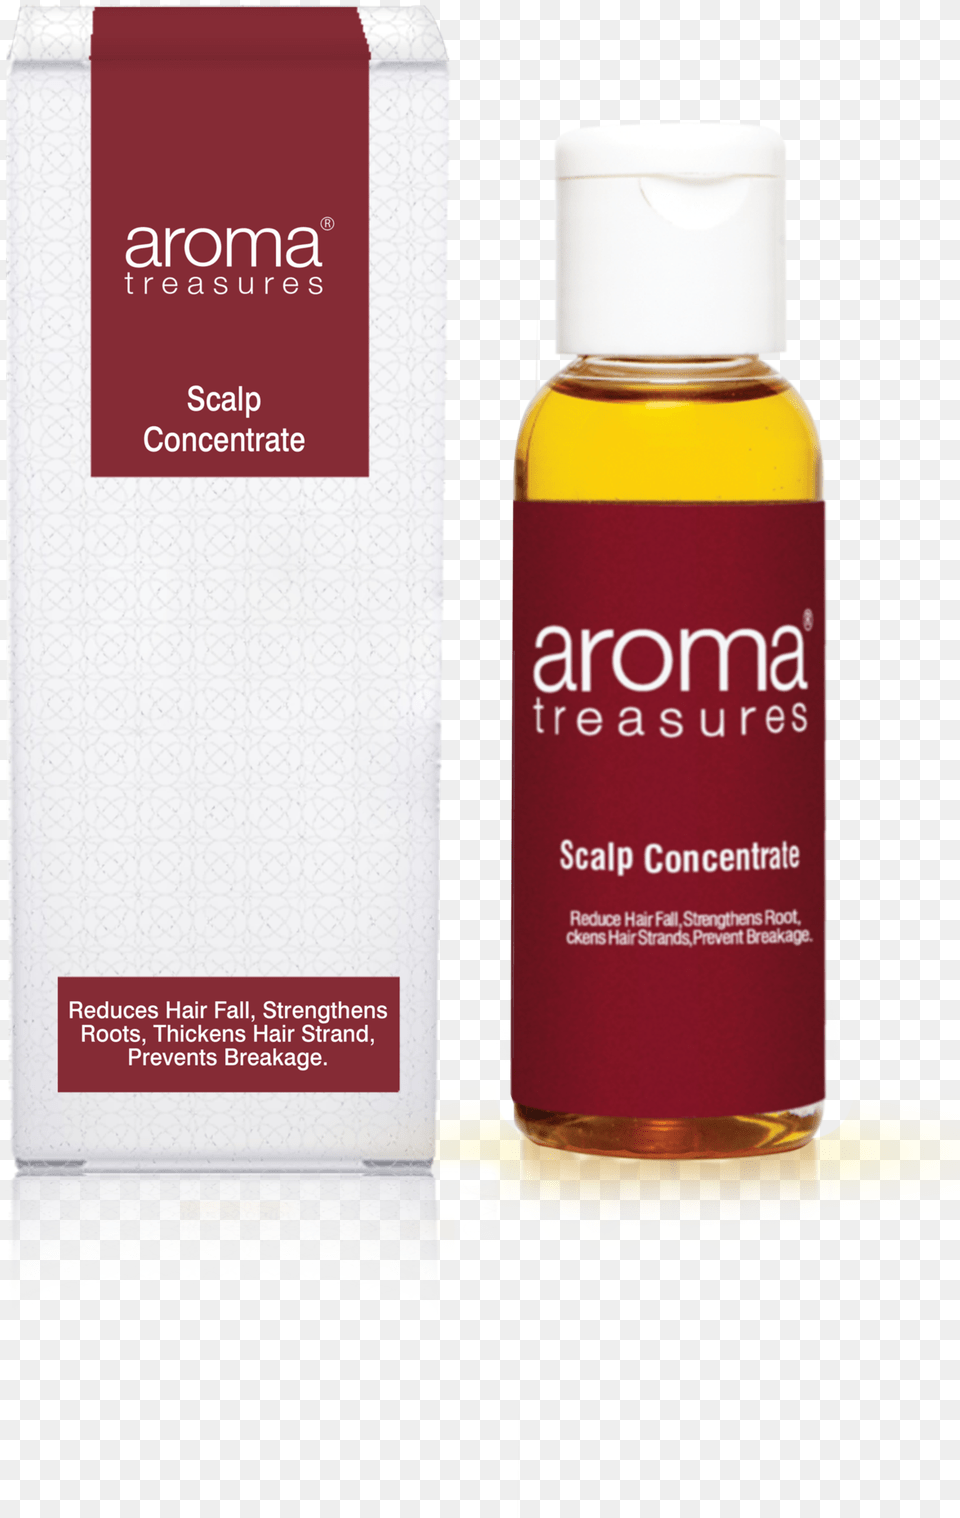 Aroma Treasures Scalp Concentrate Cosmetics, Bottle, Perfume Free Transparent Png